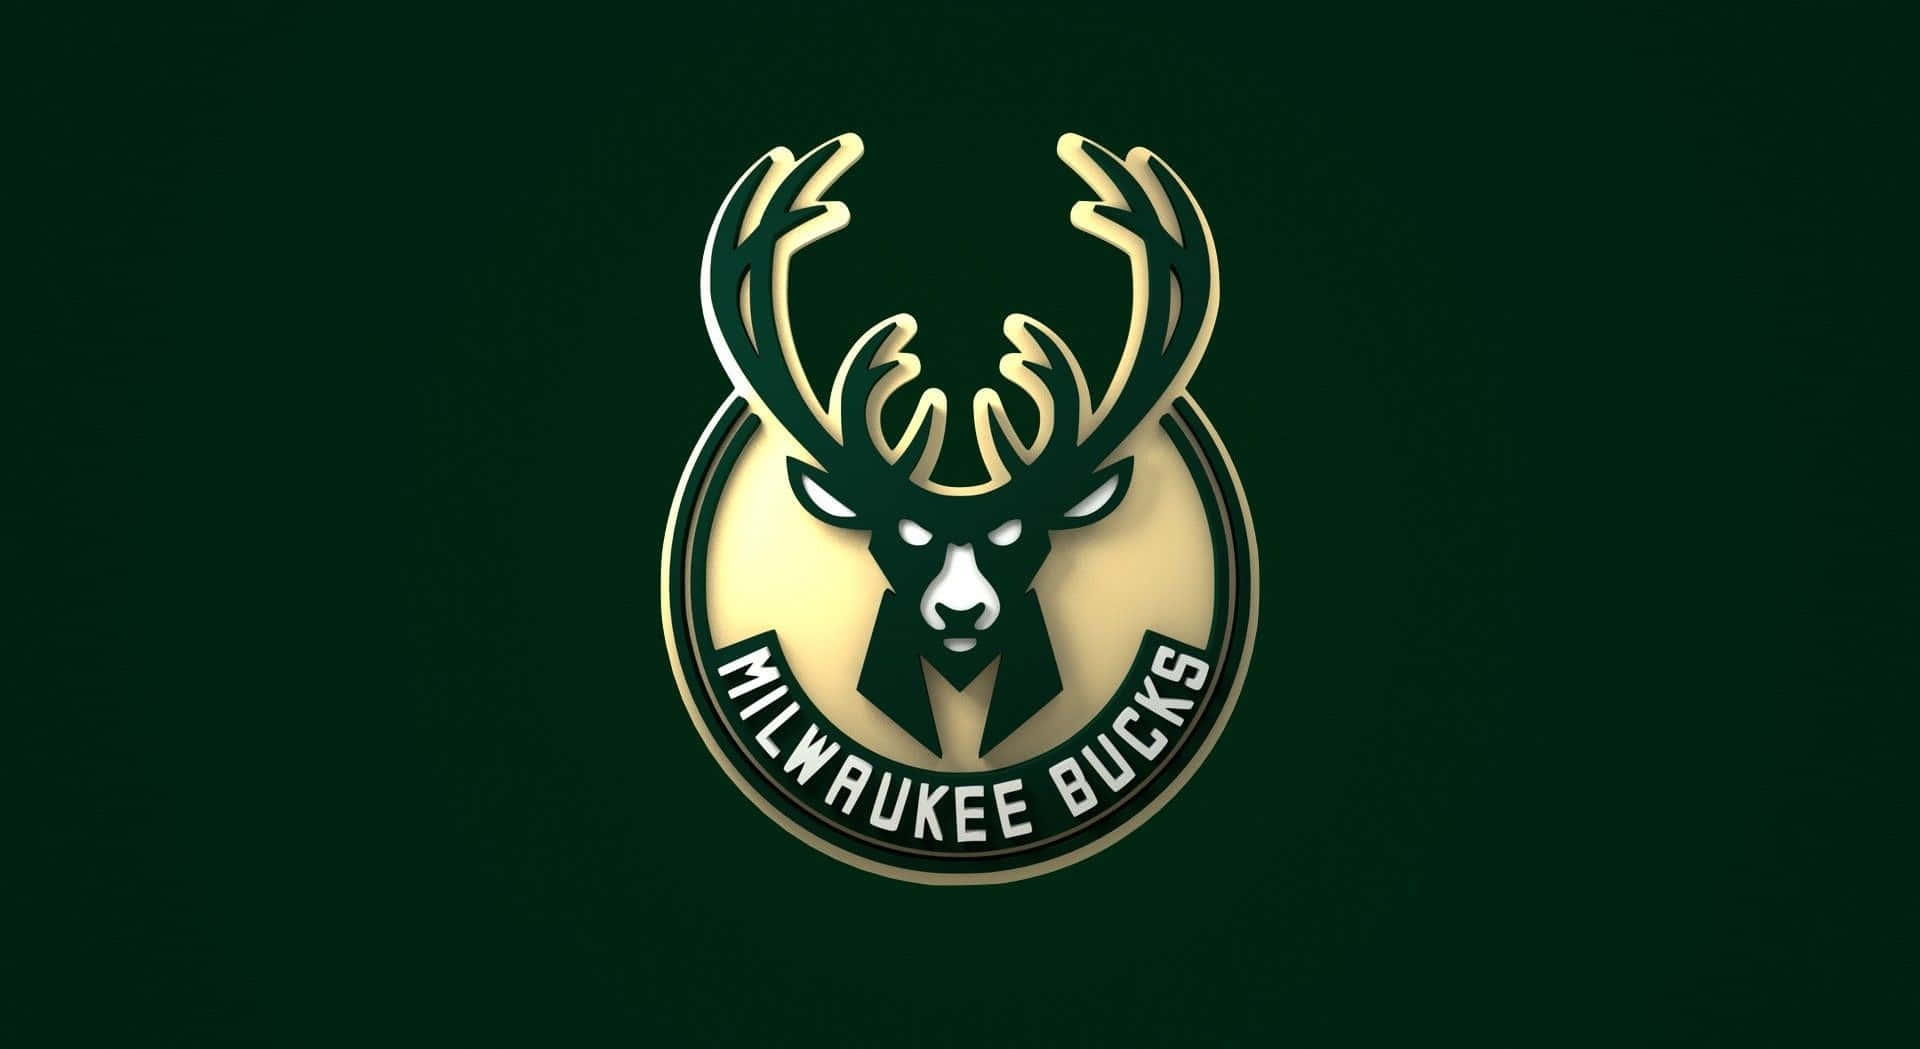 The Milwaukee Bucks logo, representing an iconic sports team in the NBA. Wallpaper